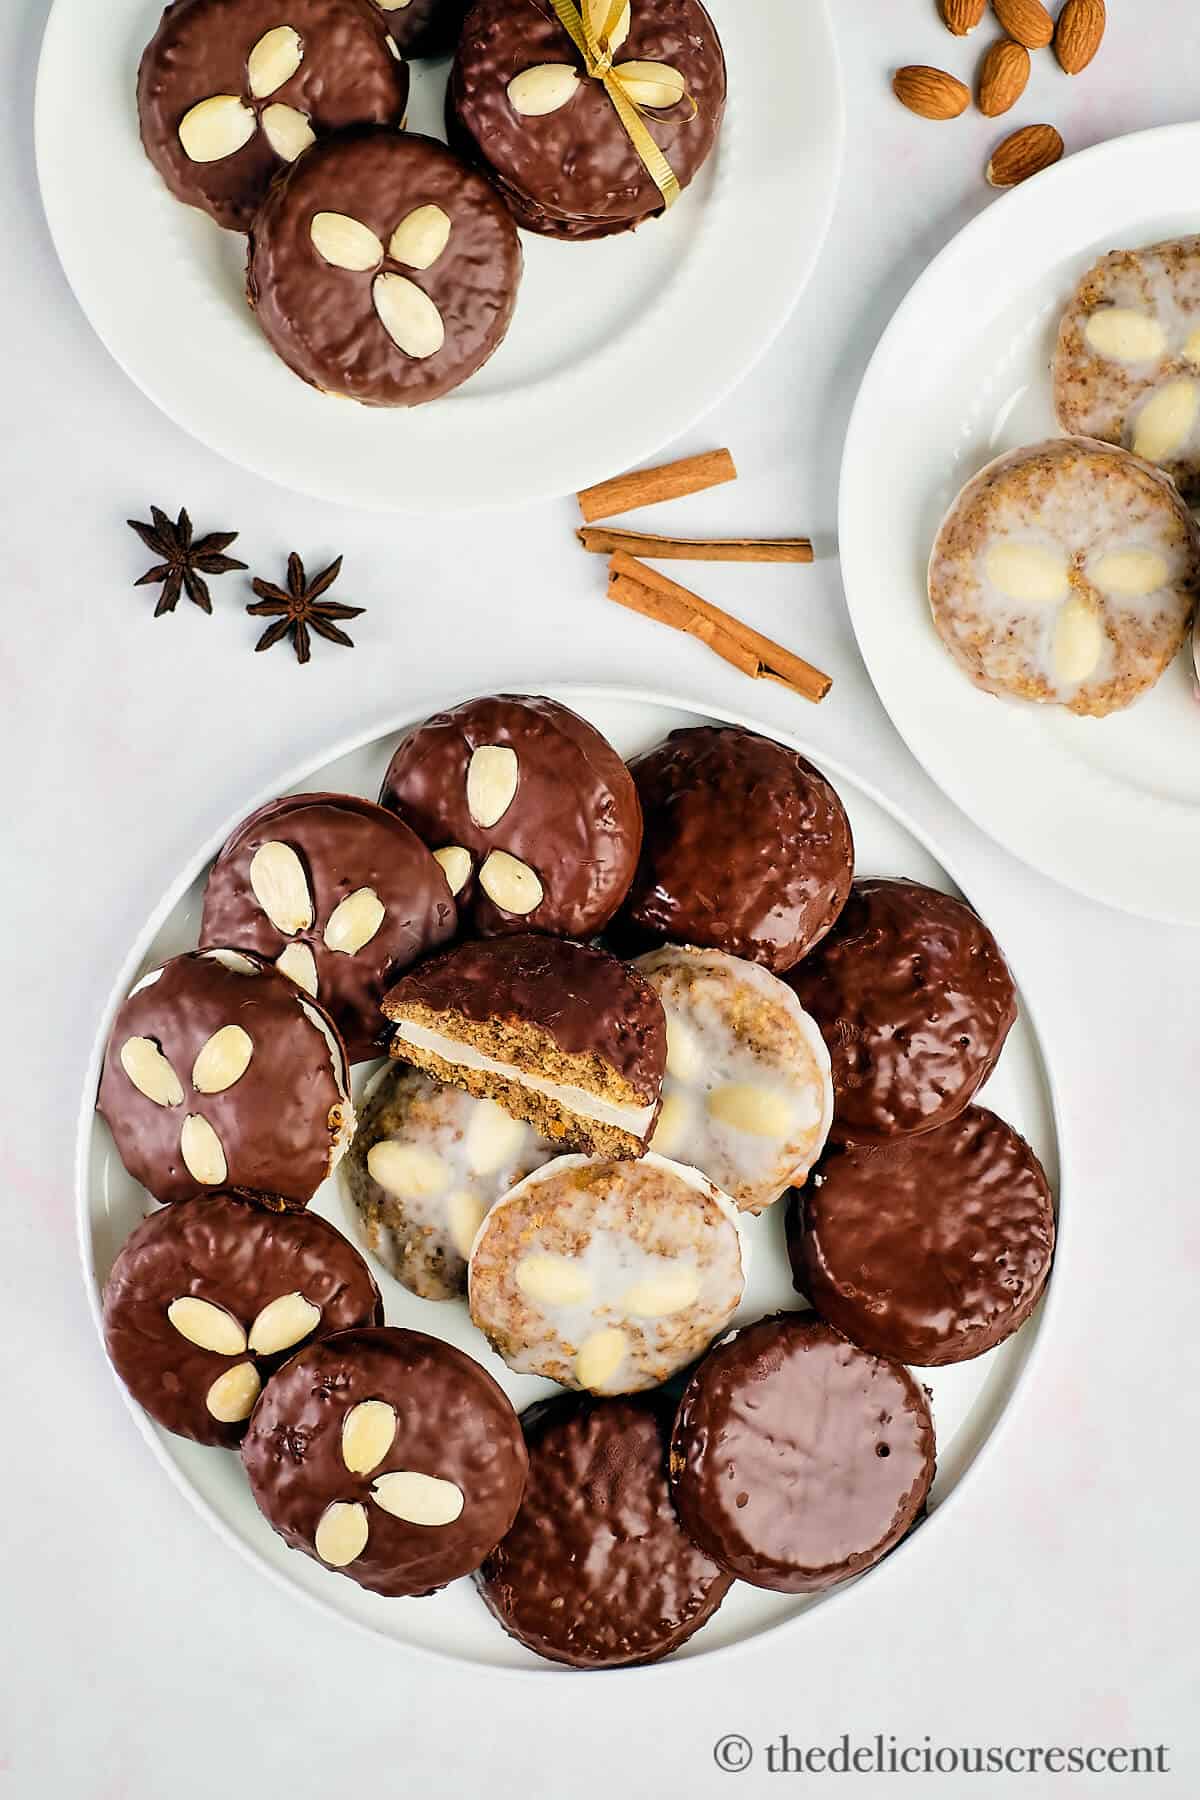 Two kinds of elisenlebkuchen served on the table.